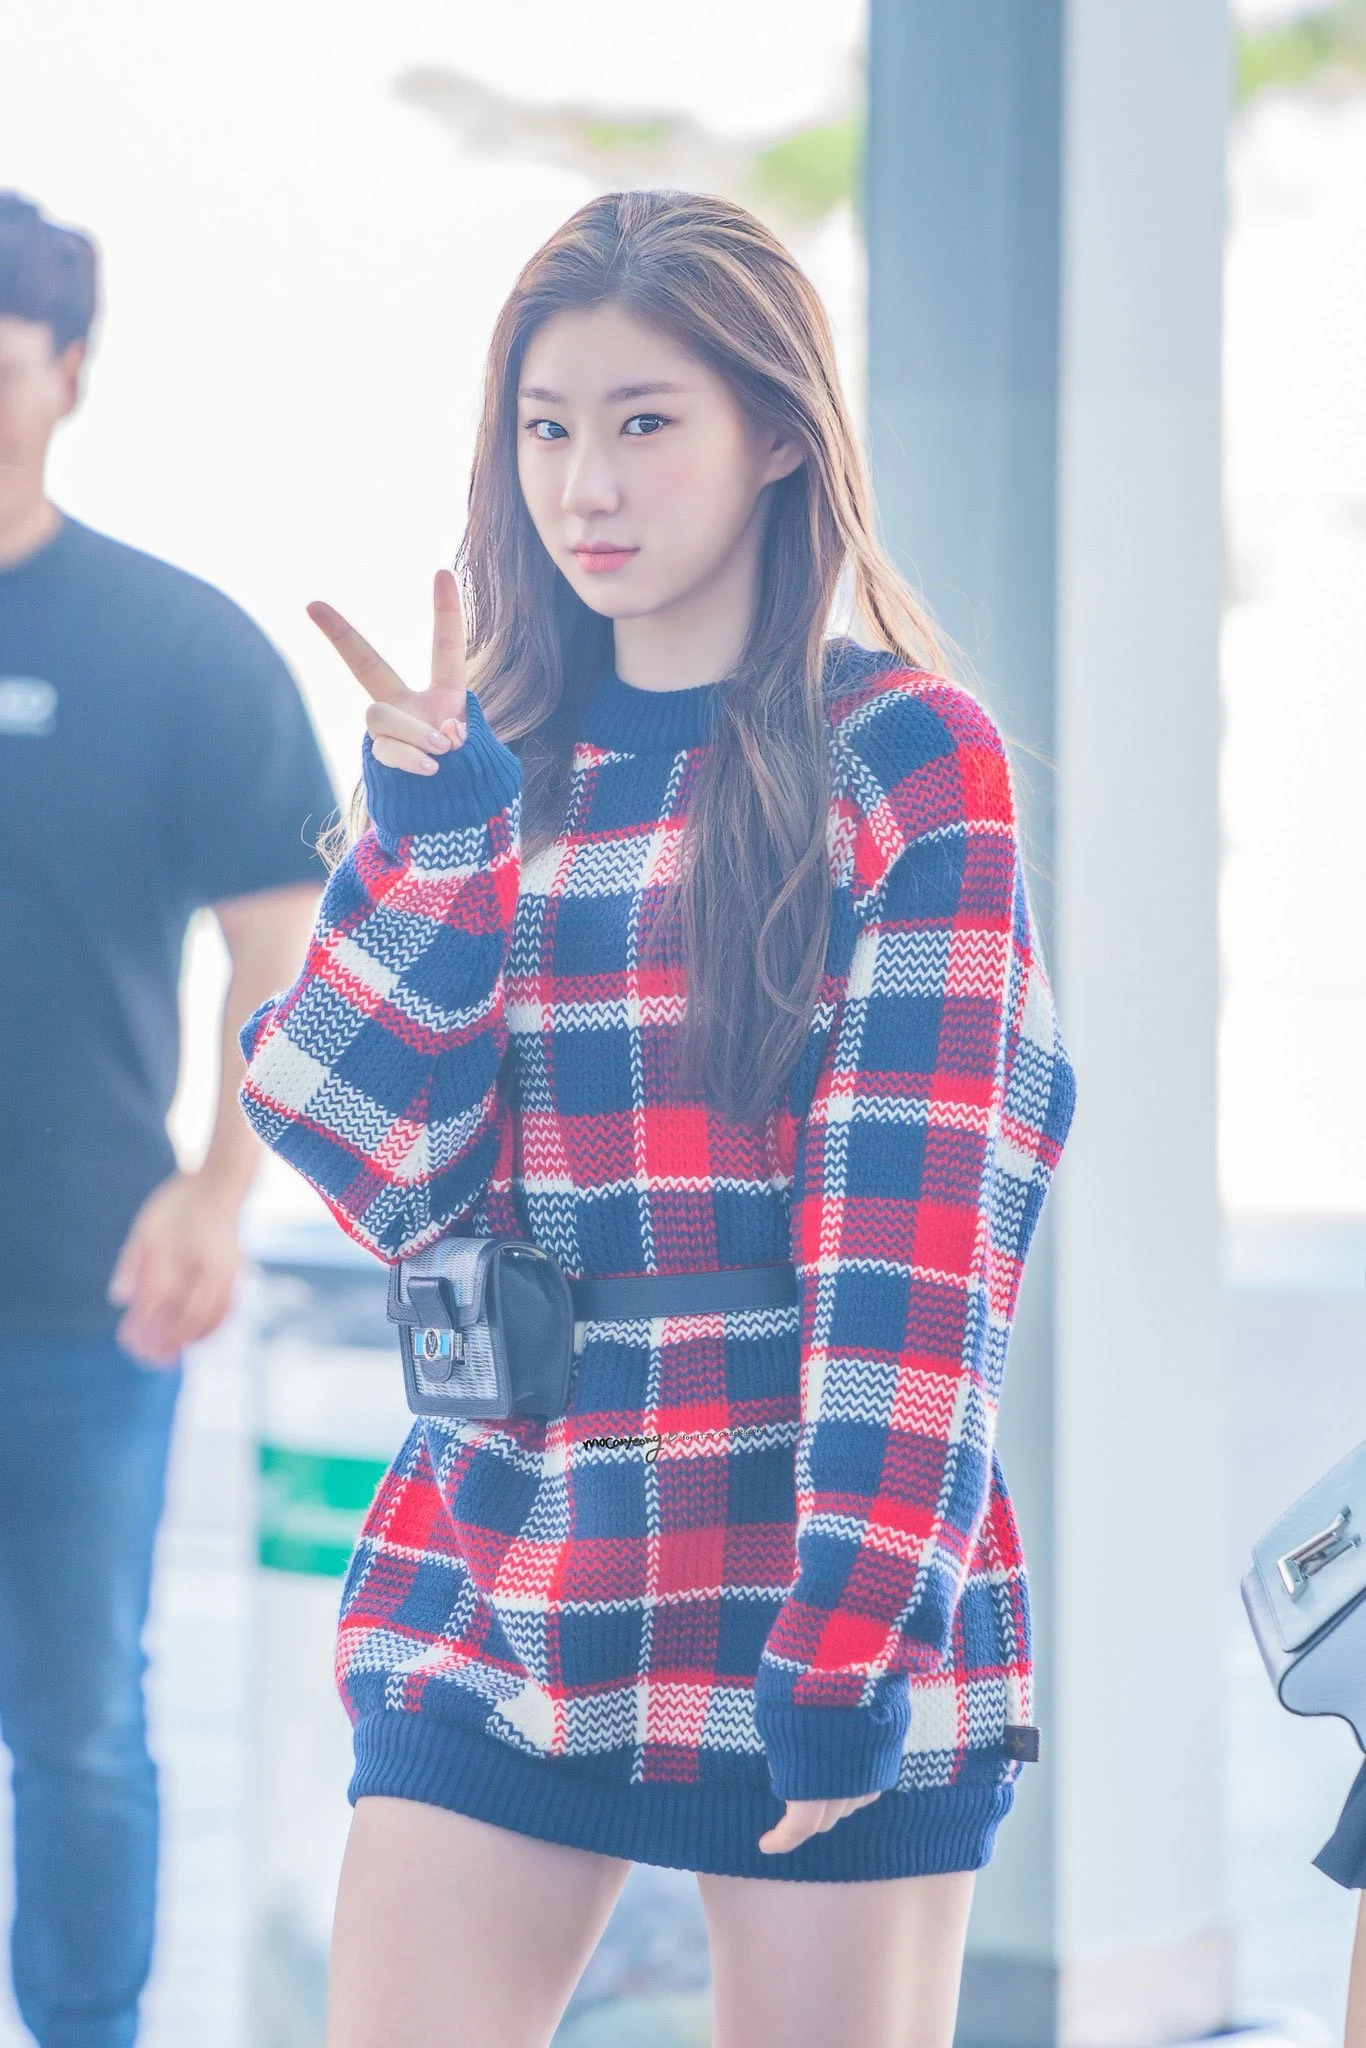 10-fashion-tips-itzy-chaeryeong-airport-style-j